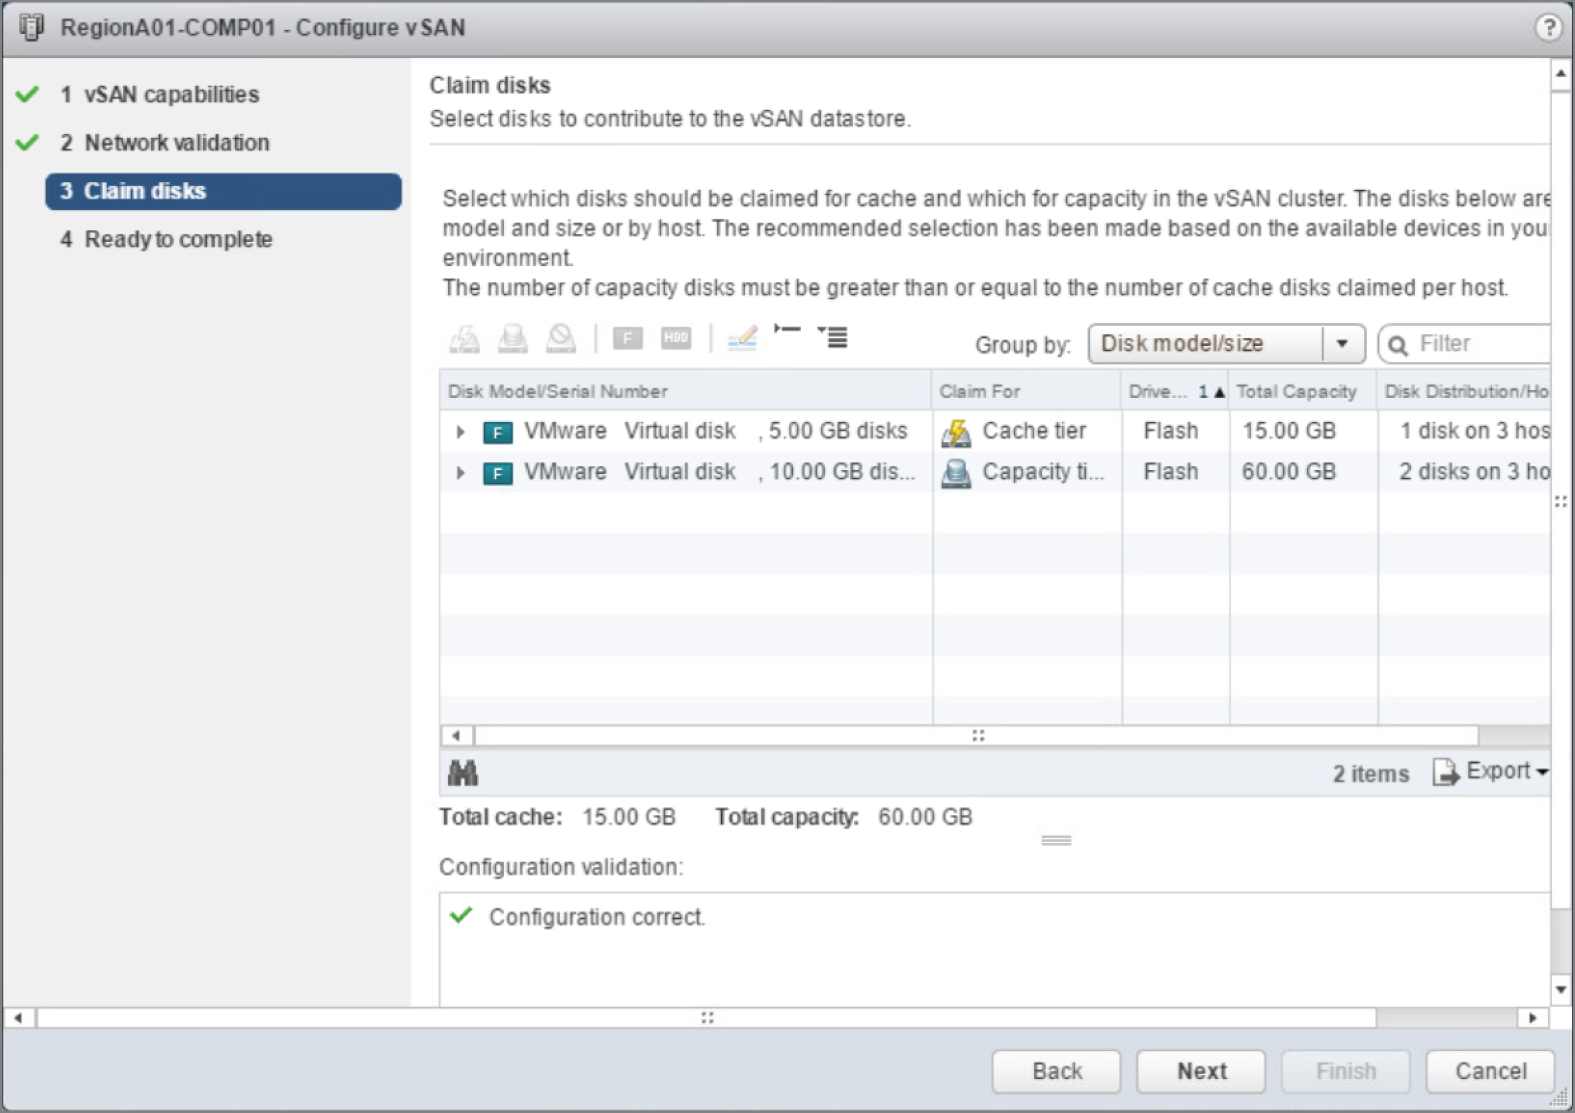 Snapshot of claiming disks for the vSAN cluster.